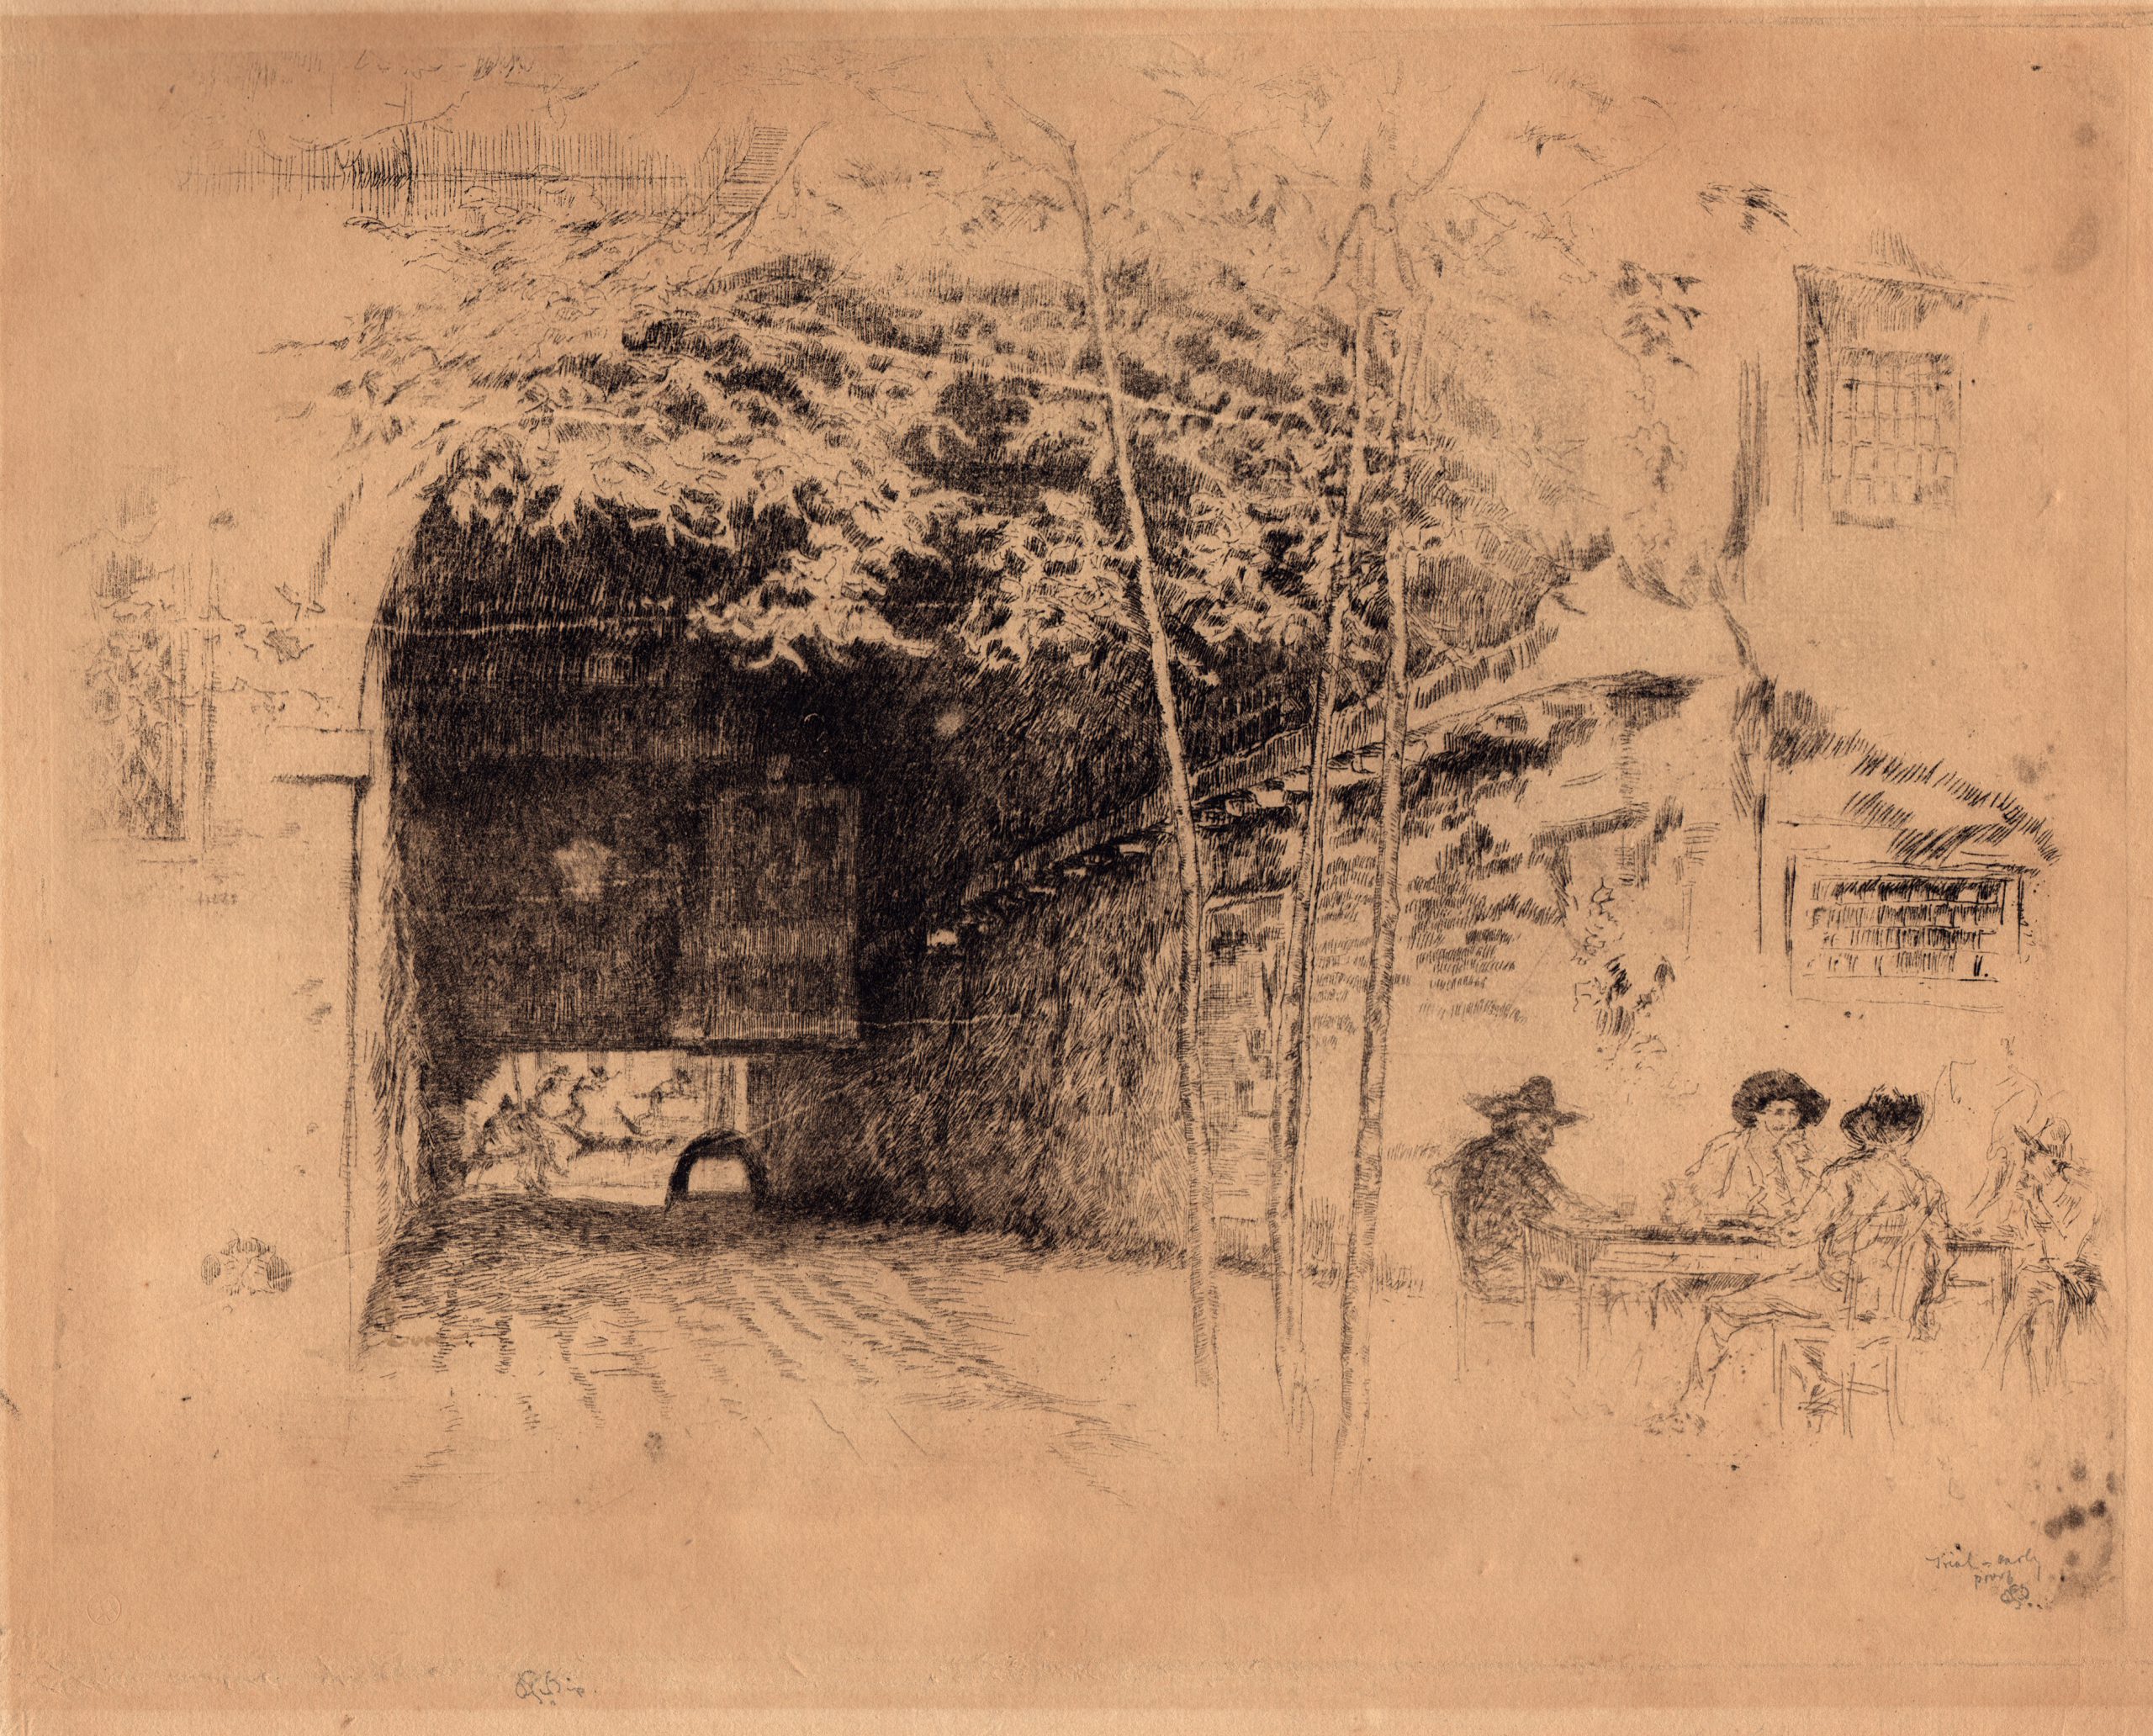 An etching and drypoint by Whistler of the traghetto in Venice. 